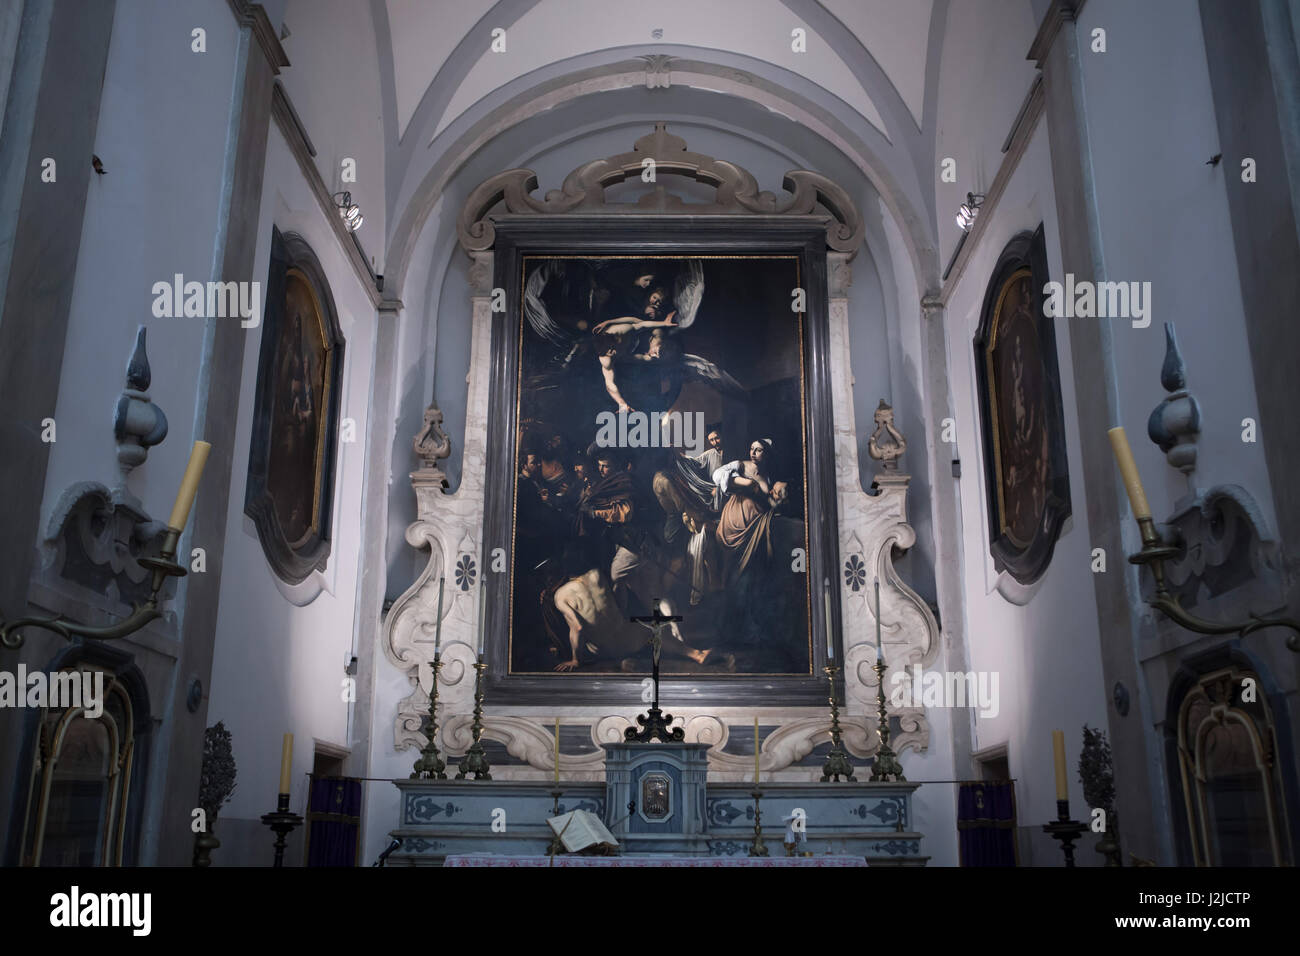 Painting 'The Seven Works of Mercy' by Italian Baroque painter Caravaggio (1606-1607) displayed in the high altar in the church of Pio Monte della Misericordia in Naples, Campania, Italy. Stock Photo